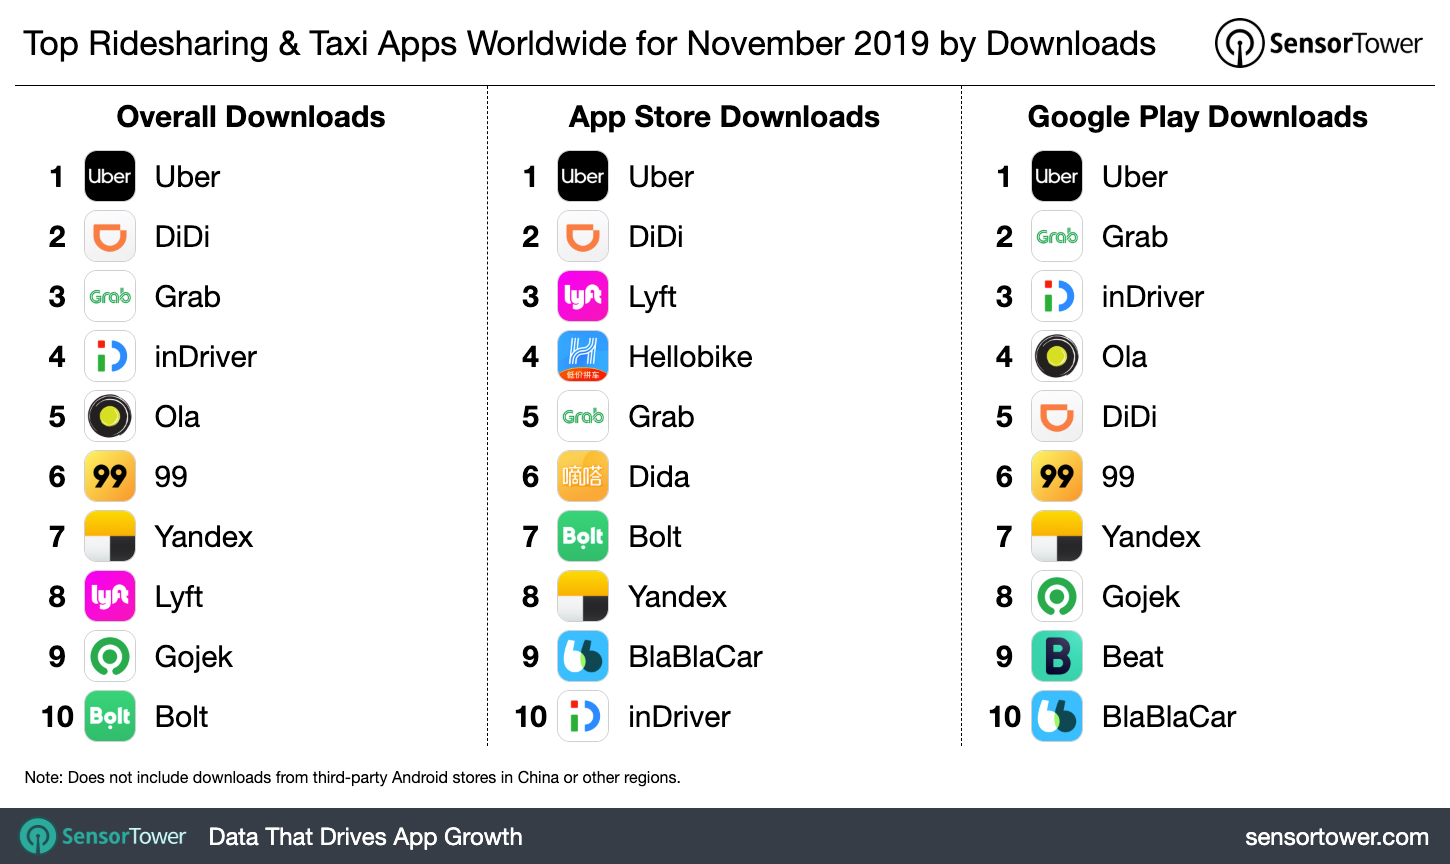 Top Ridesharing & Taxi Apps Worldwide for November 2019 by Downloads